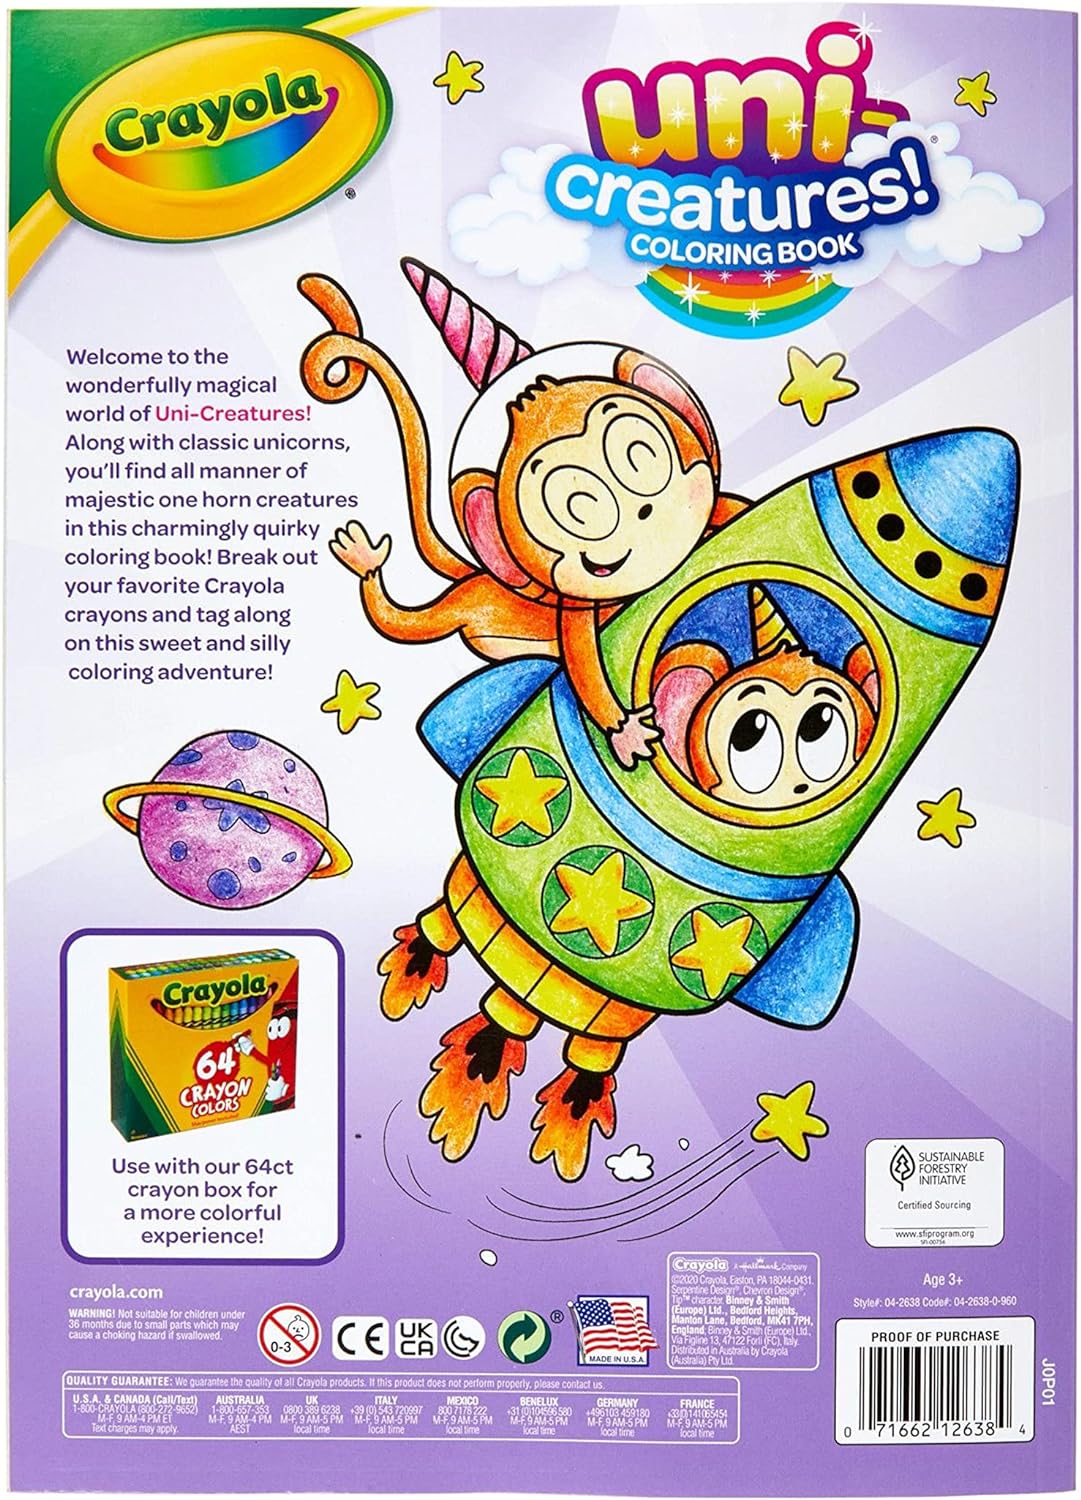 Crayola Uni-Creatures Coloring Book - Unicorn (96 Pages)